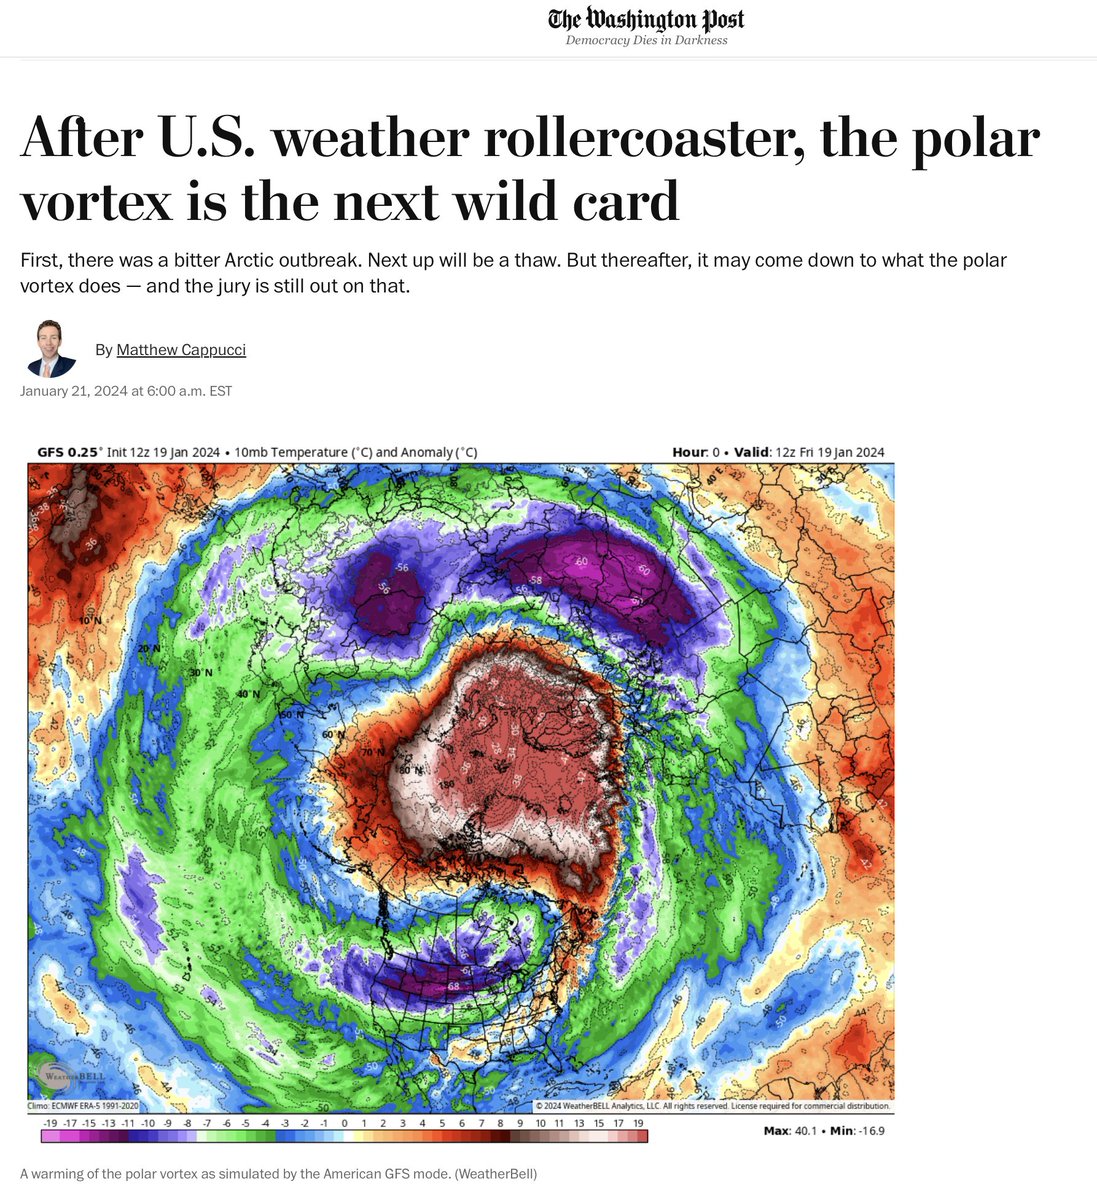 The climate hoax is damned if they say it and damned if they don't: WaPo @capitalweather admits by omission that emissions have nothing to do with the unpredictable disruption of the polar vortex. washingtonpost.com/weather/2024/0…